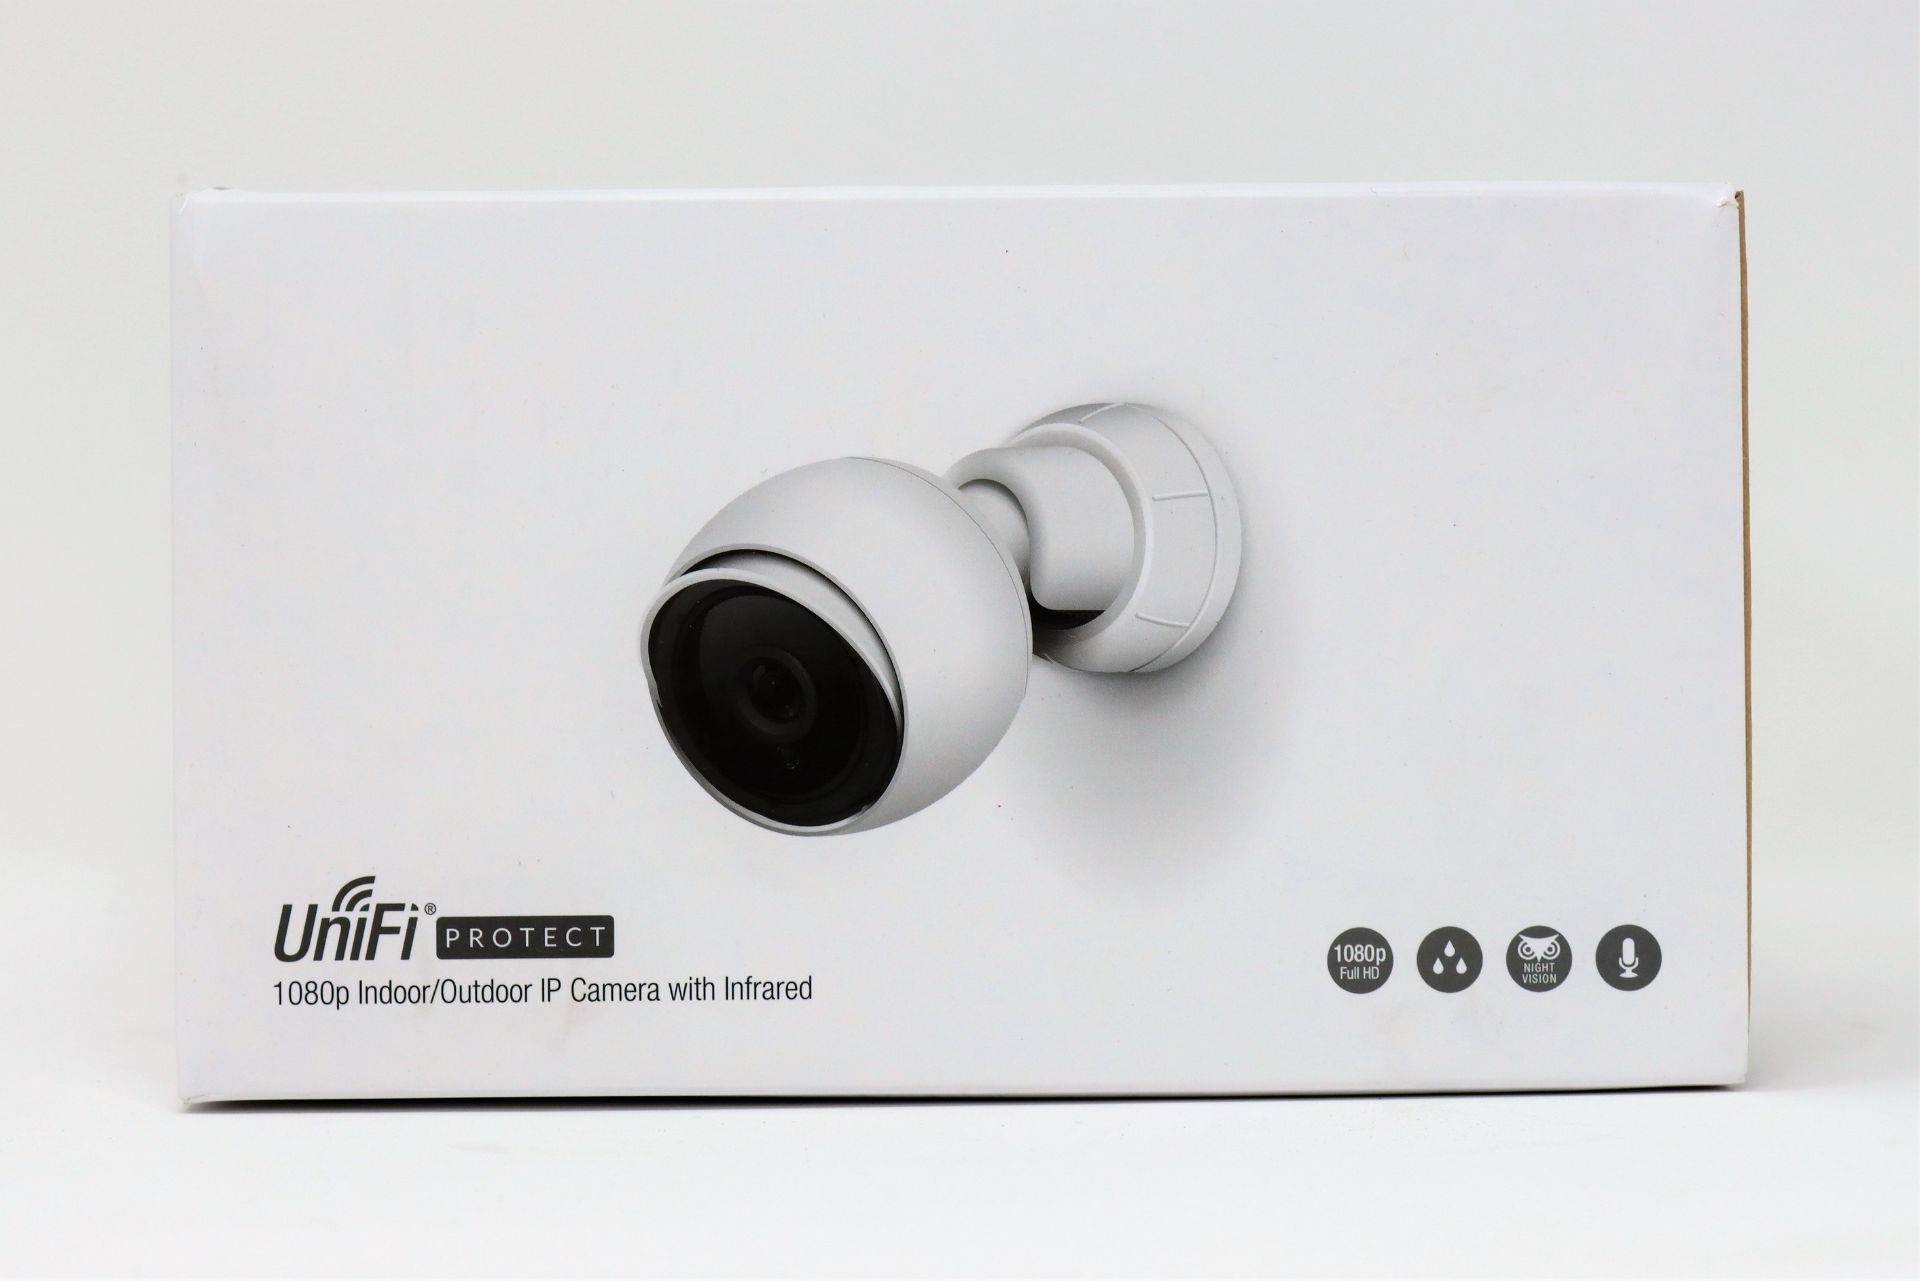 A boxed as new Ubiquiti UniFi Protect 1080p Indoor/Outdoor IP Camera with Infrared (UVC-G3-BULLET).